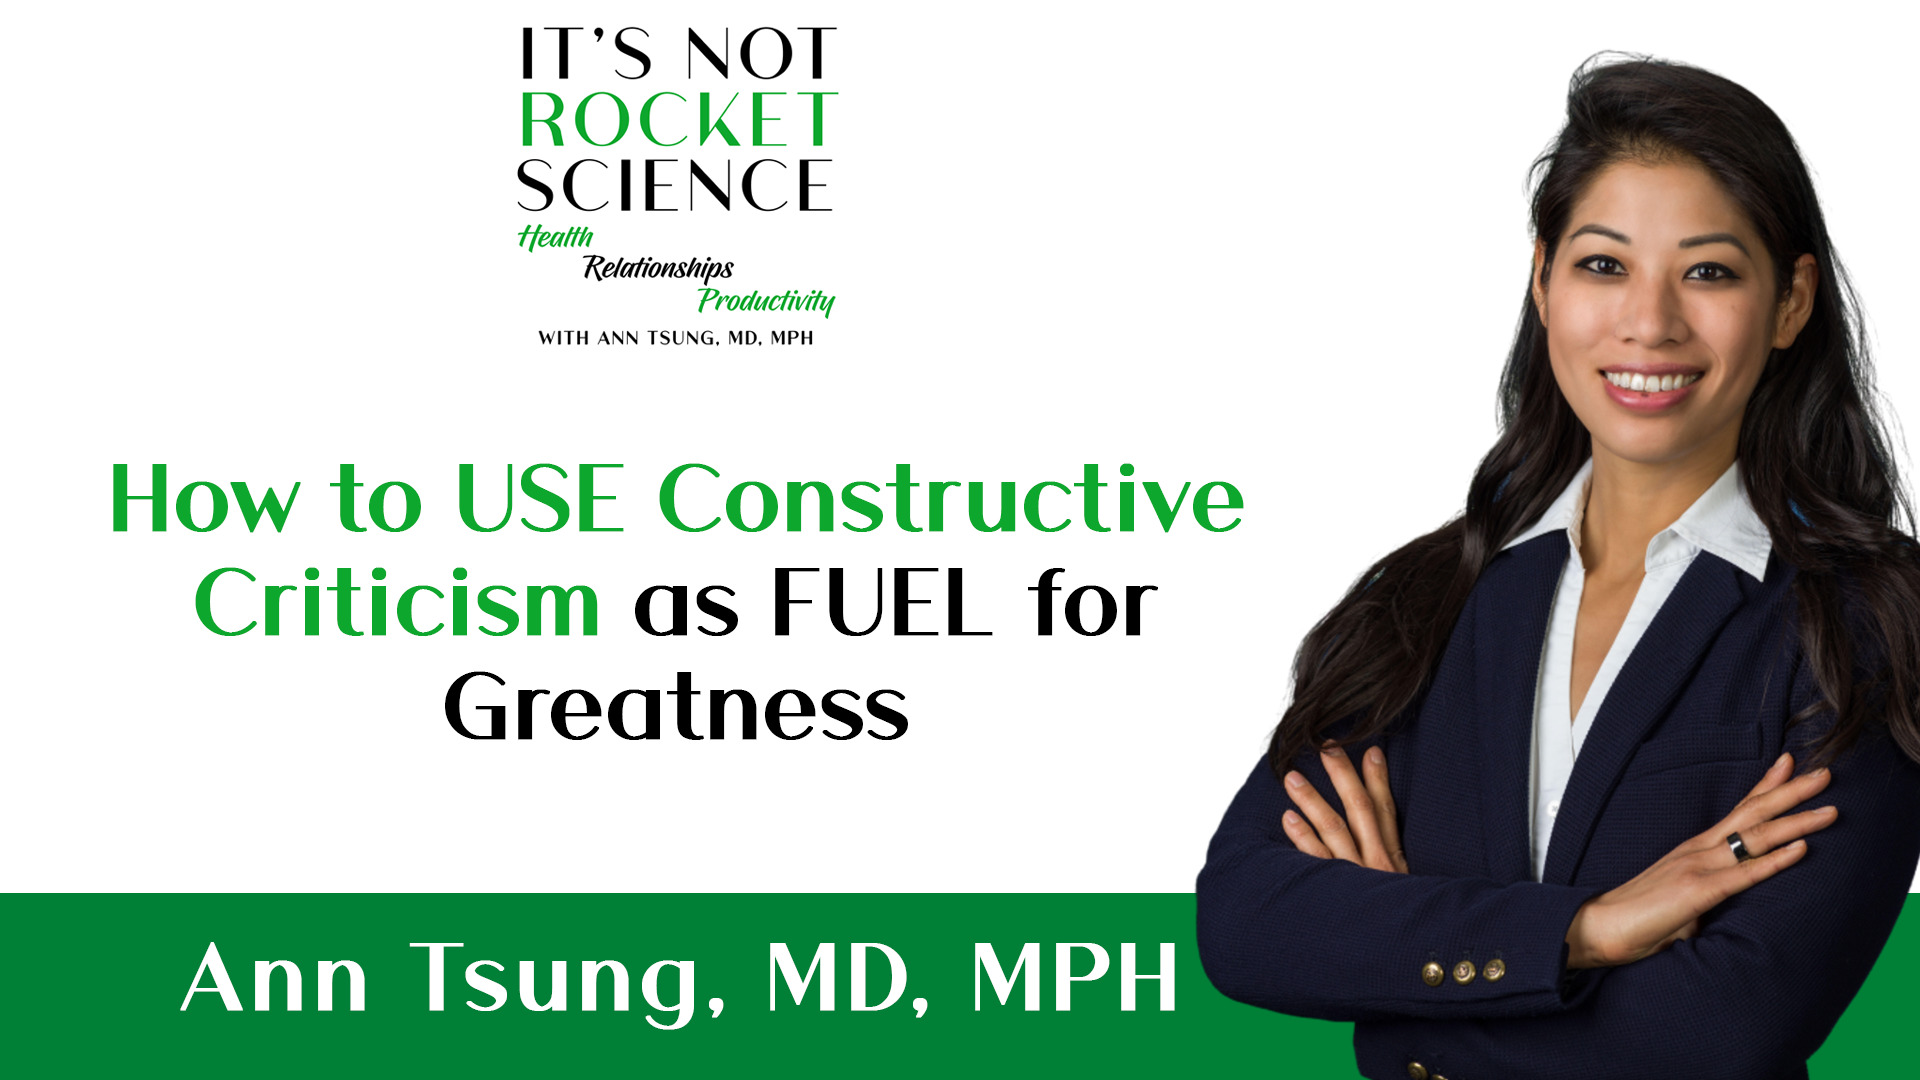 047. How to USE Constructive Criticism as FUEL for Greatness